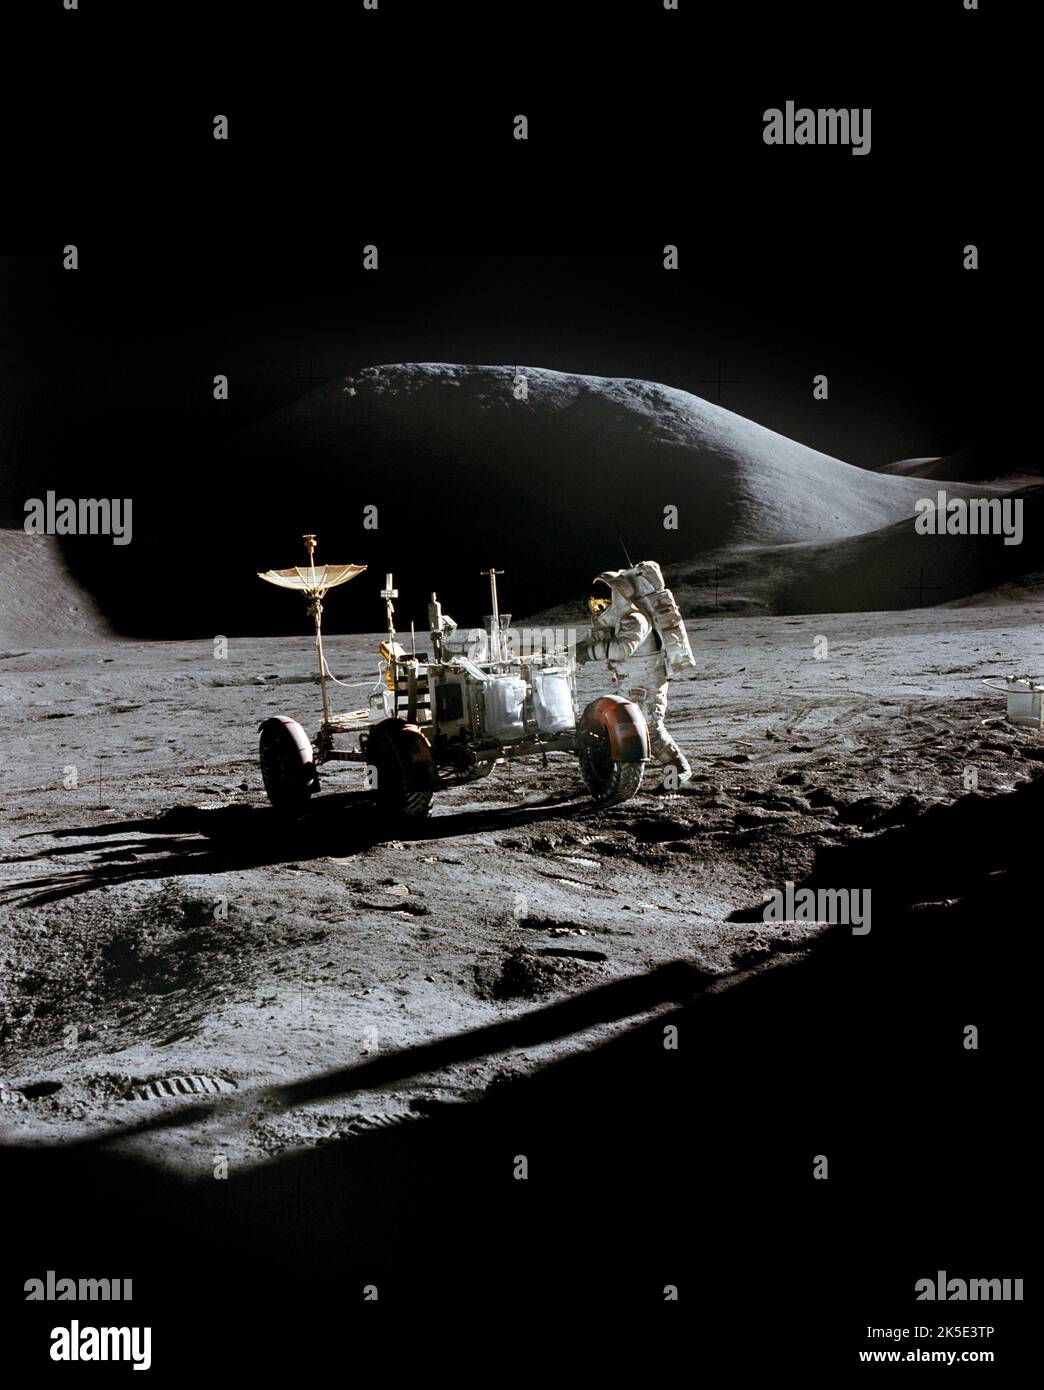 Moon landings: Apollo 15 & the Lunar Roving Vehicle (LRV). On 31 July 1971 the LRV made its lunar debut and travelled over 17 miles with 3 hours and 2 minutes of driving time. The LRV greatly expanded the range of the Apollo astronauts' lunar surface activities and experiments. This photo, taken by commander David R. Scott, shows lunar module pilot James B. Irwin working at the LRV during the first Apollo 15 lunar surface extravehicular activity (EVA) at the Hadley-Apennine landing site A unique optimised NASA image (with added black vertical space above original square image): Credit: NASA Stock Photo